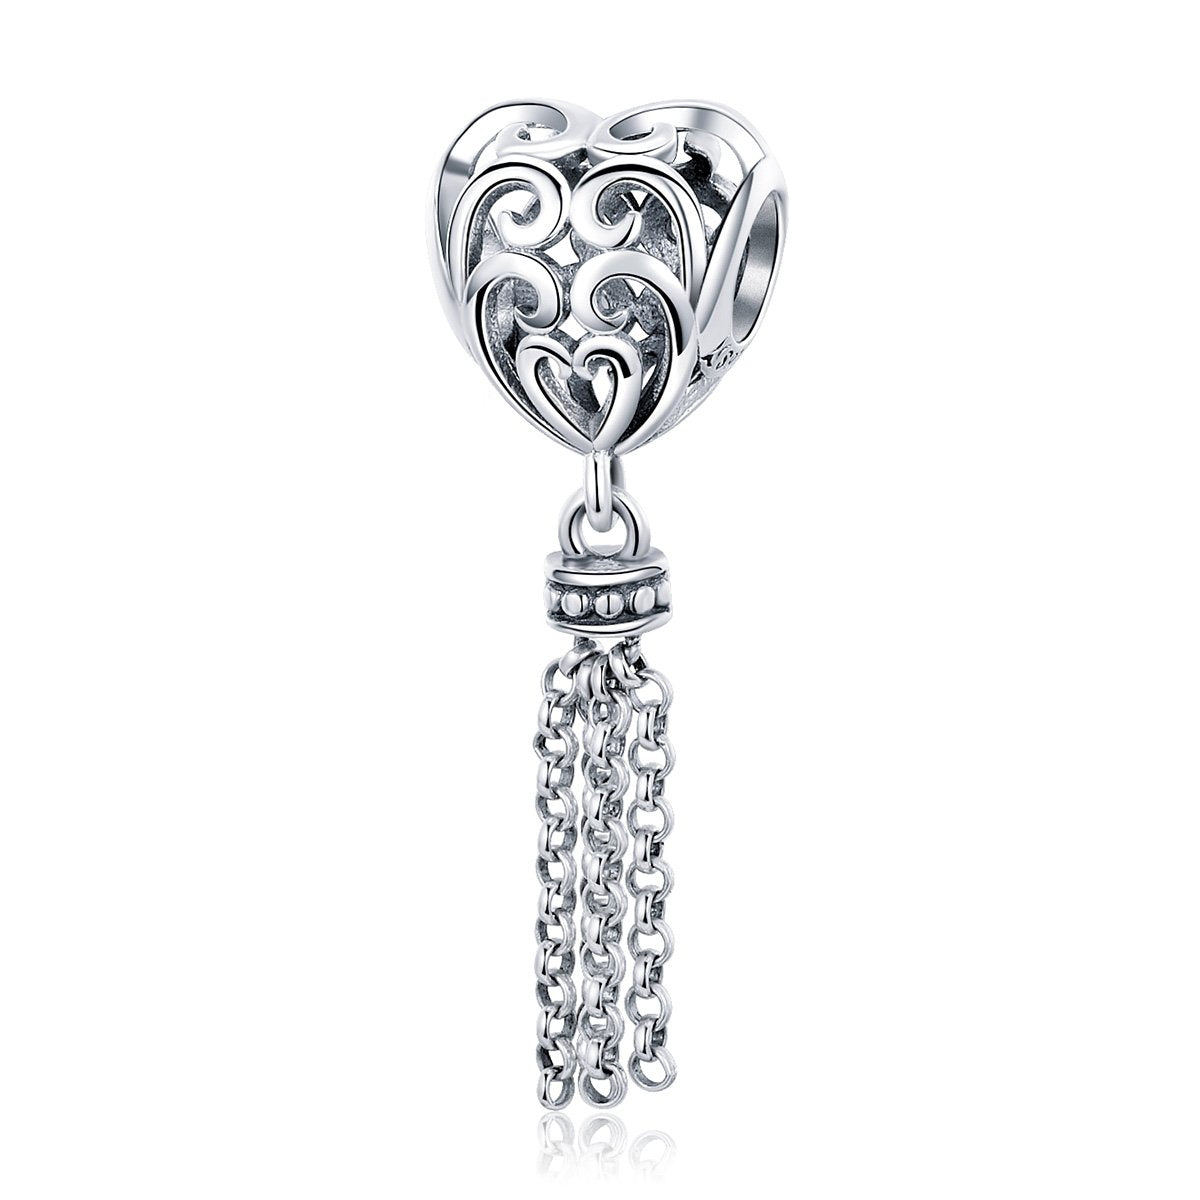 Sterling 925 silver charm the dangling heart in hand fits Pandora charm and European charm bracelet Xaxe.com